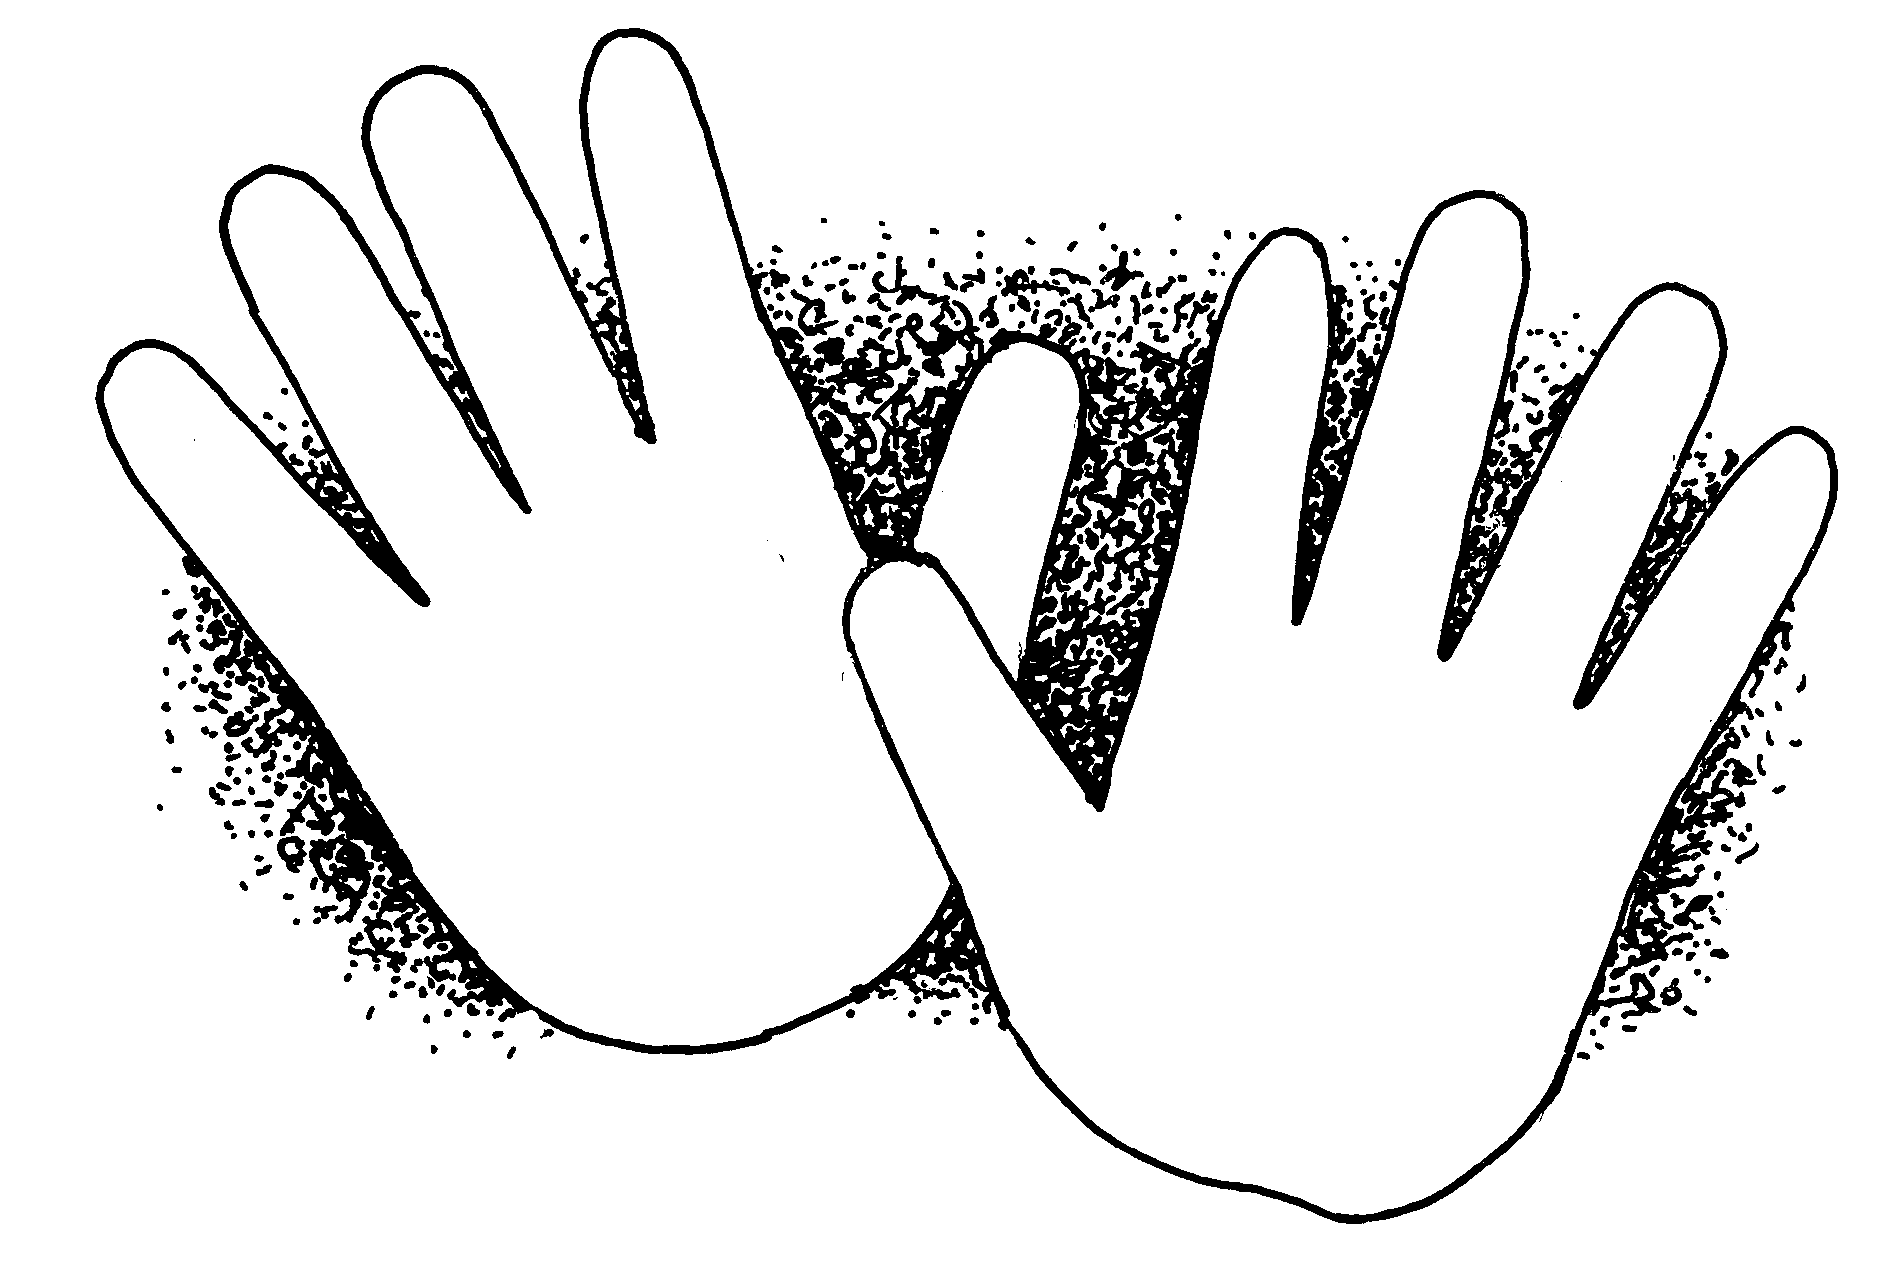 hand clipart black and white - Hands Clipart Black And White